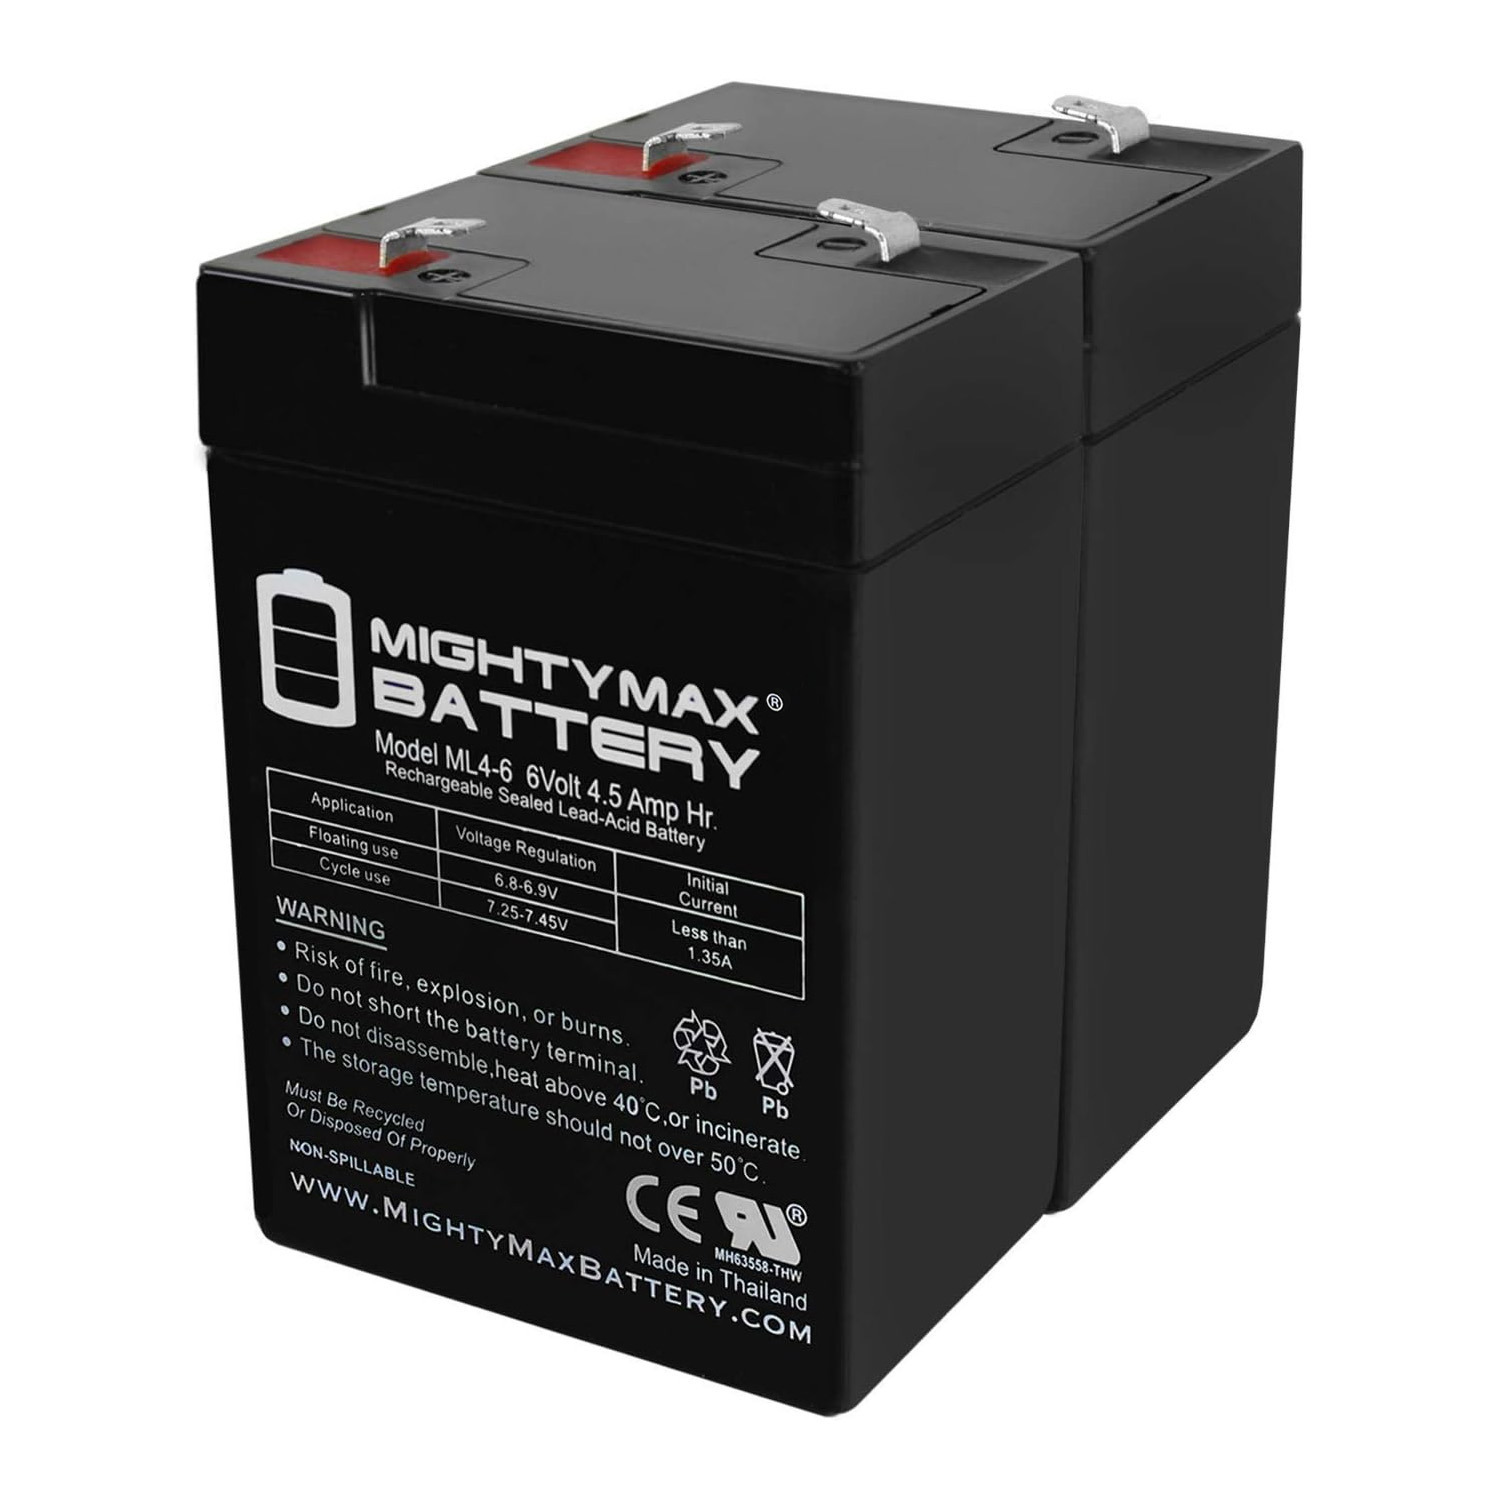 6V 4.5AH Replacement Battery for Powertron PS640 - 2 Pack